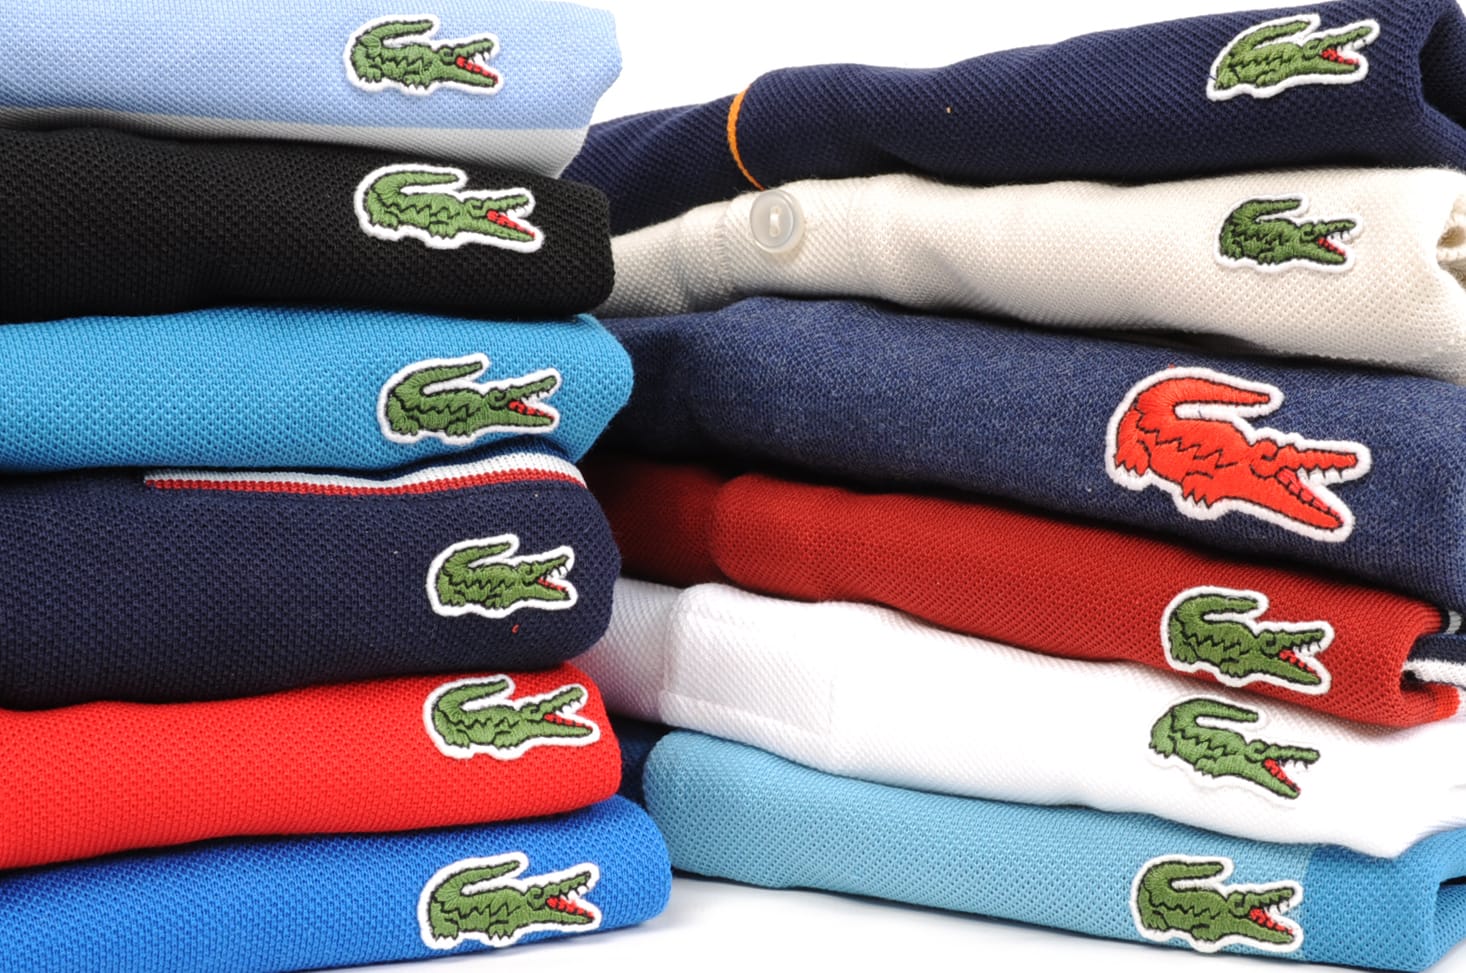 Lacoste trainers and polo sale  Buy into the history of an iconic brand